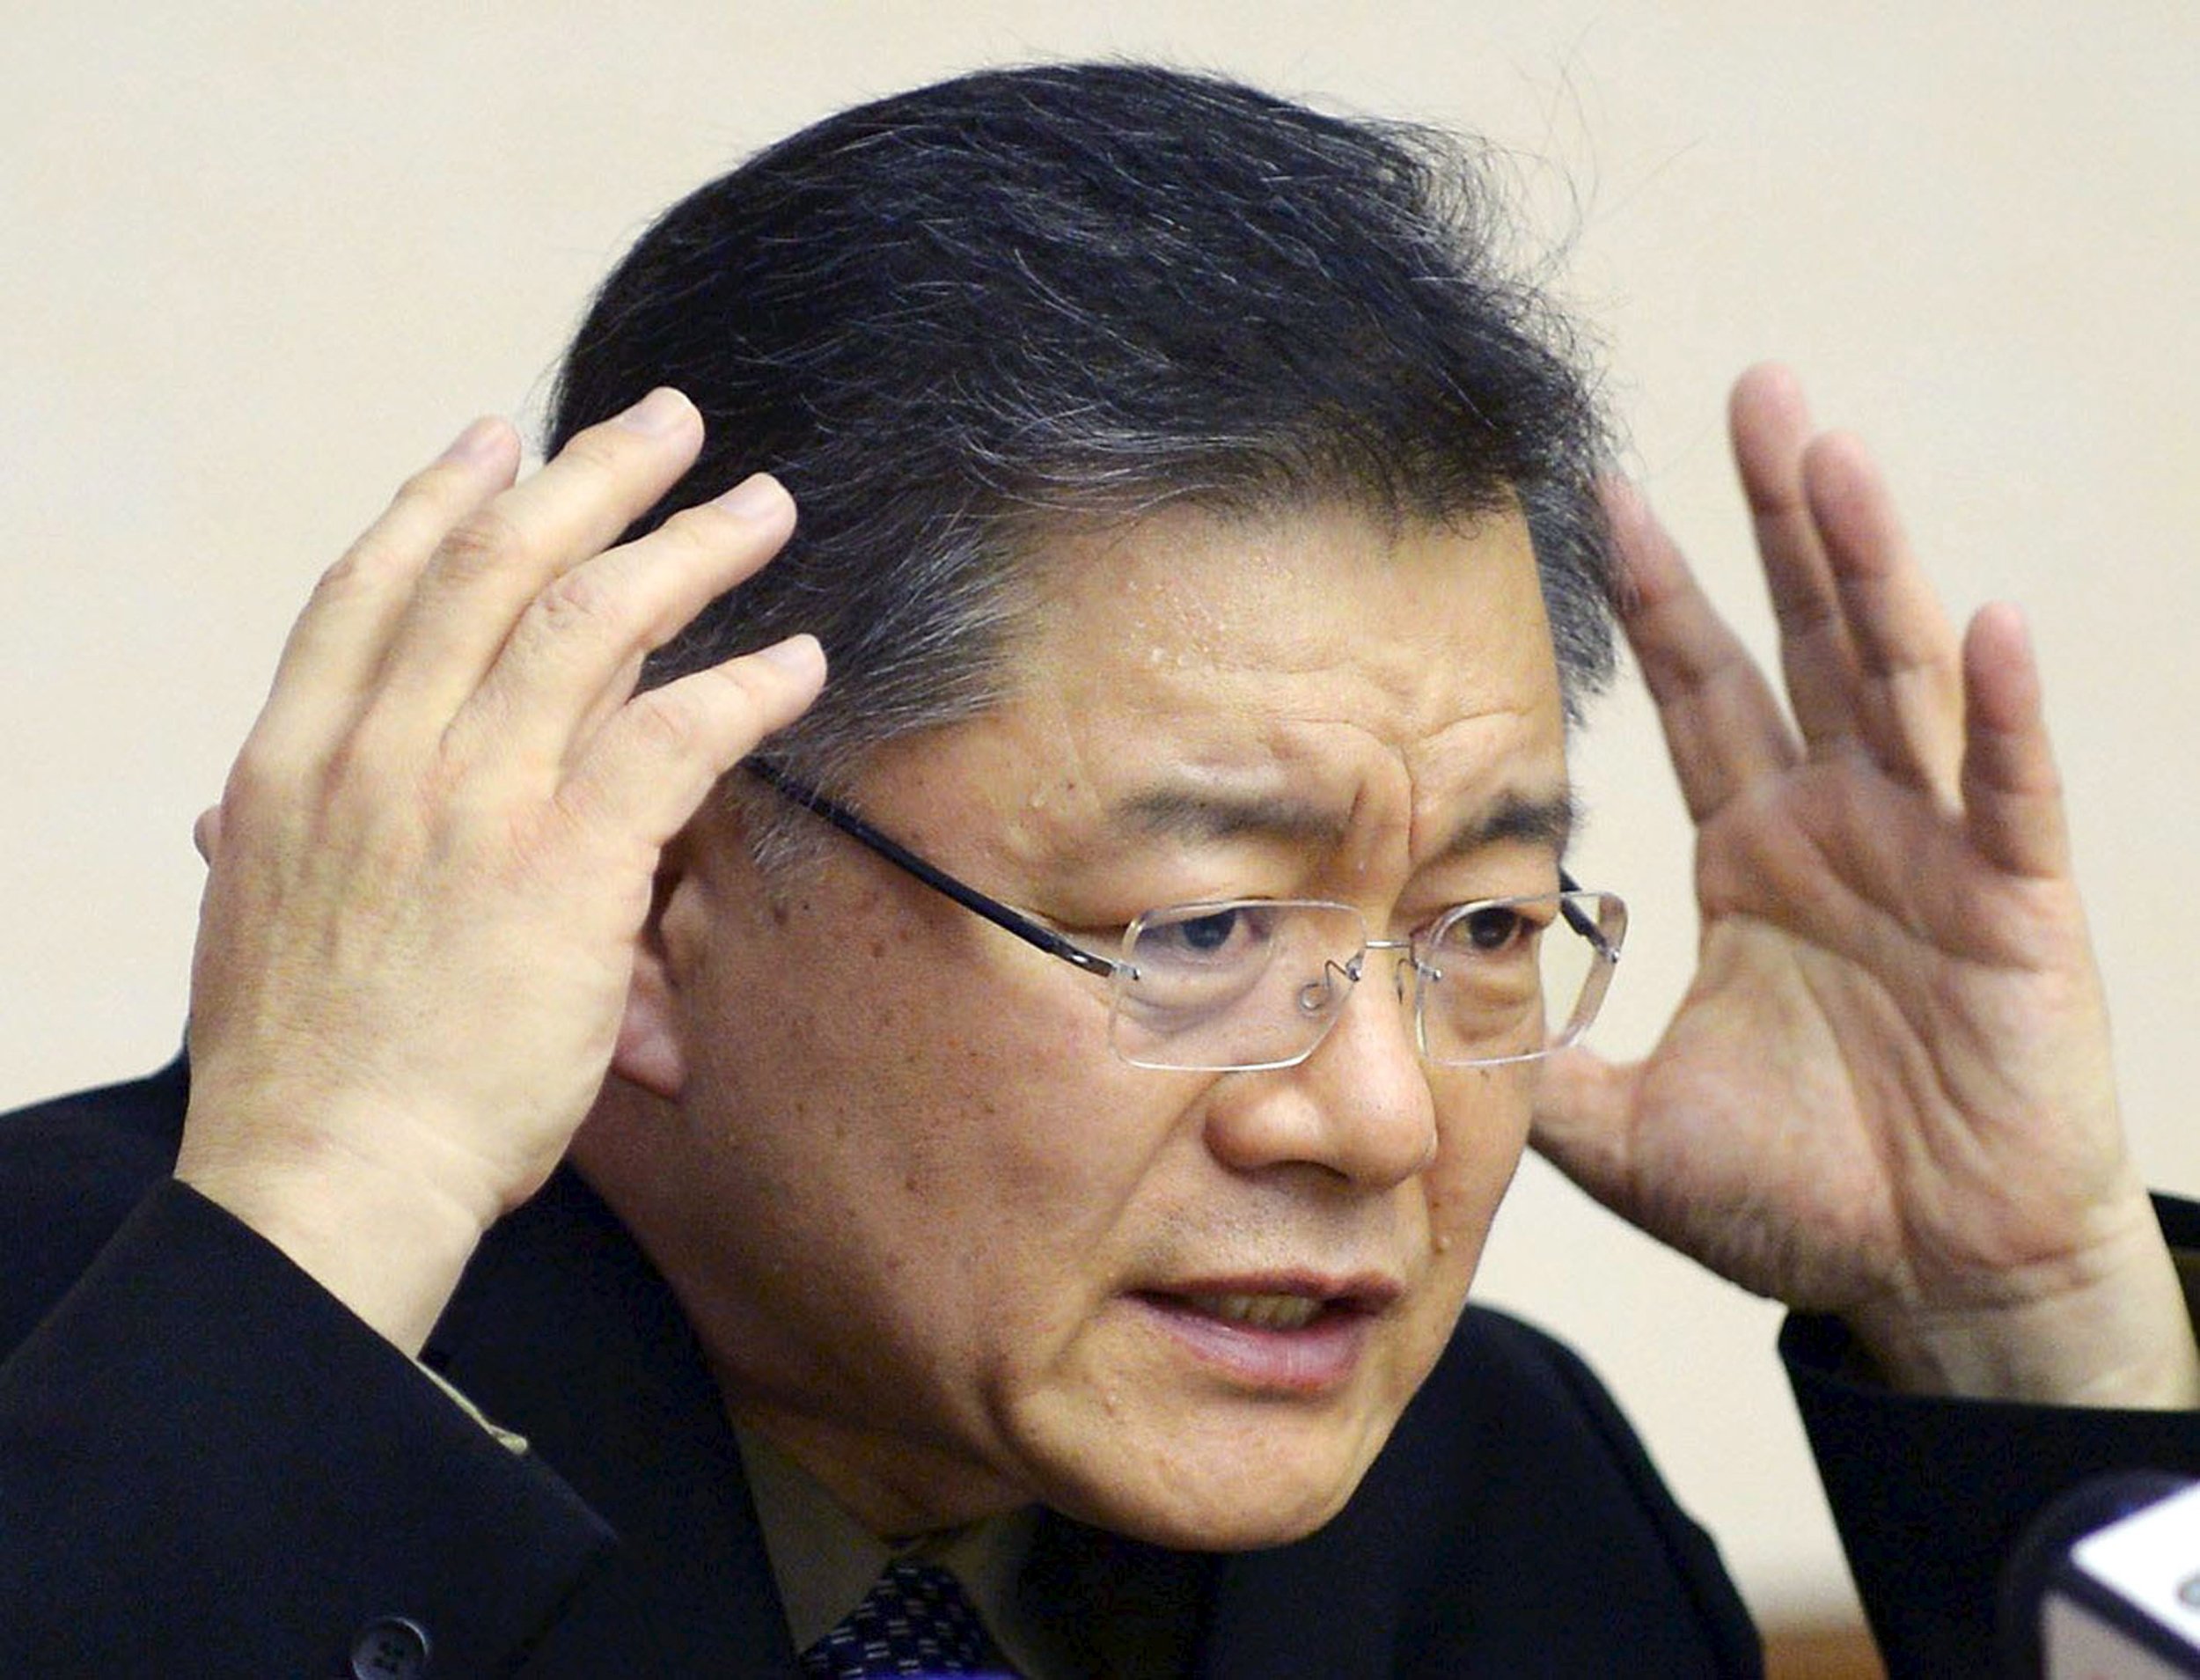 North Korea Sentences Canadian Pastor Hyeon Soo Lim To Life For Crimes Against State Ibtimes 